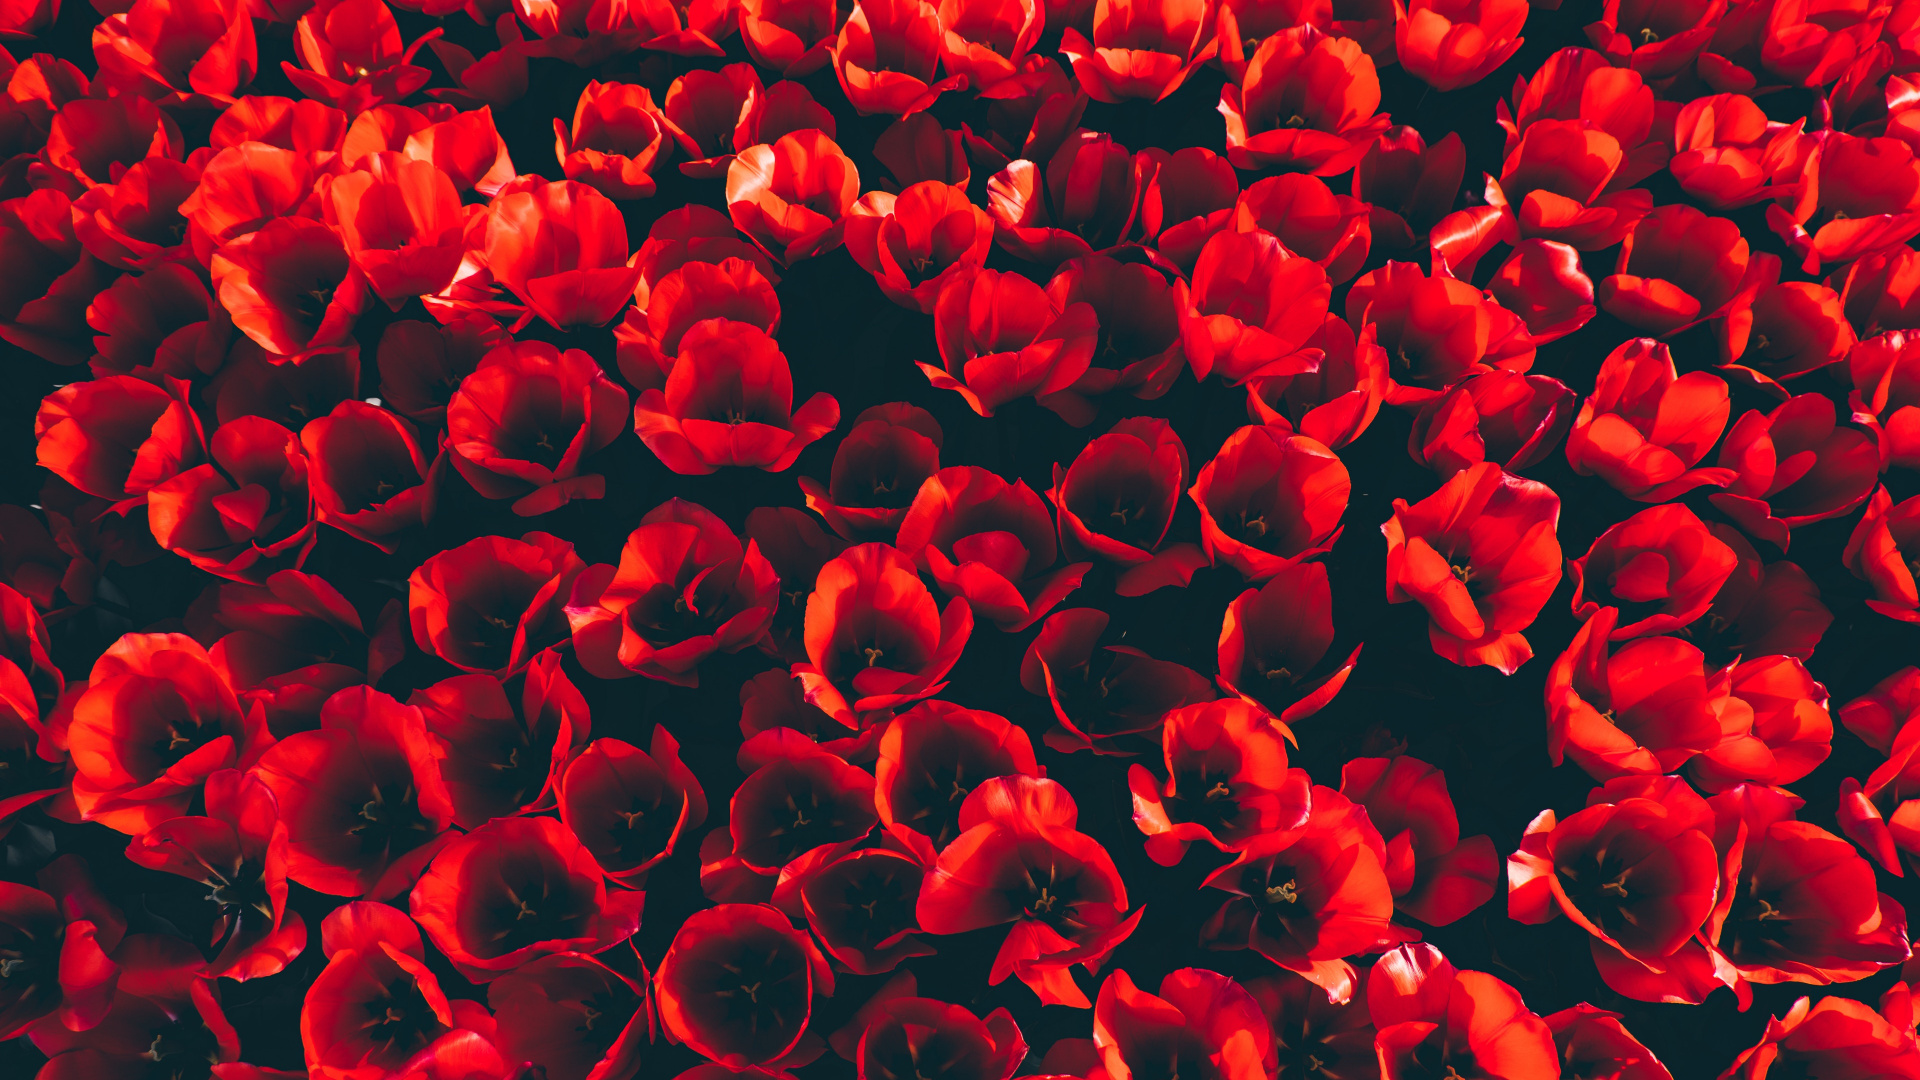 Red Flower Petals in Close up Photography. Wallpaper in 1920x1080 Resolution